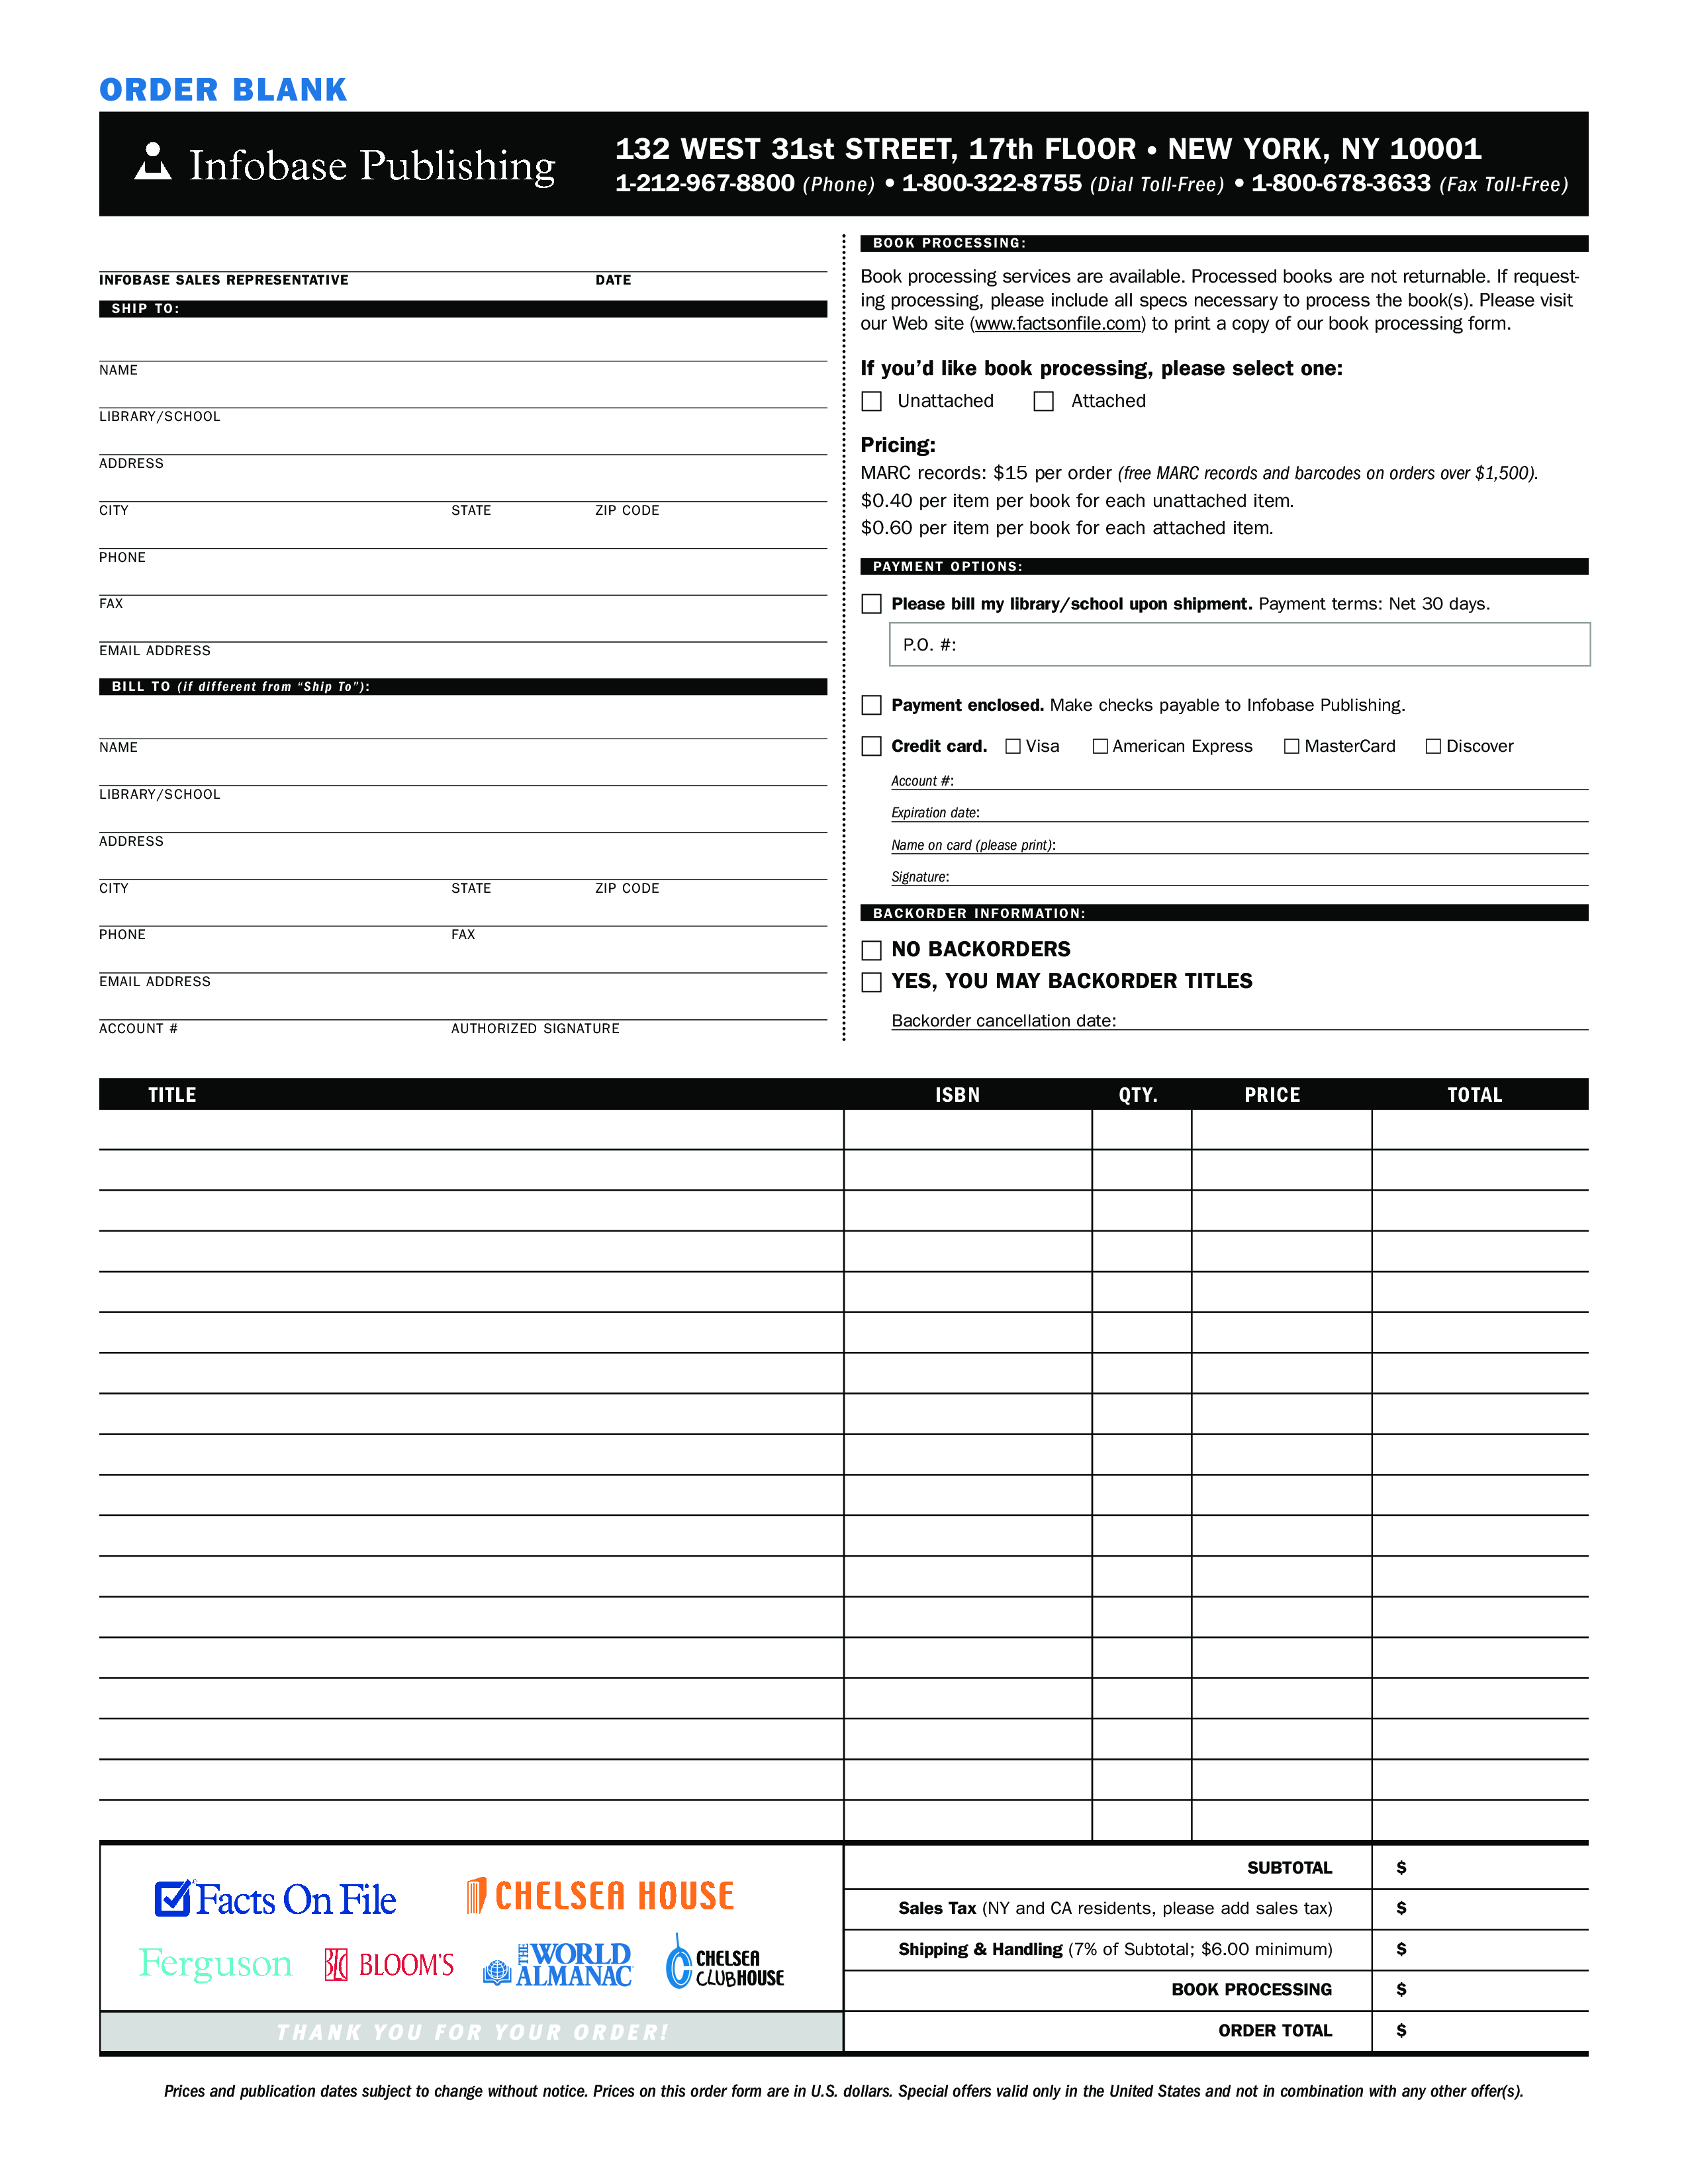 Document To Publisher Blank Order Form main image